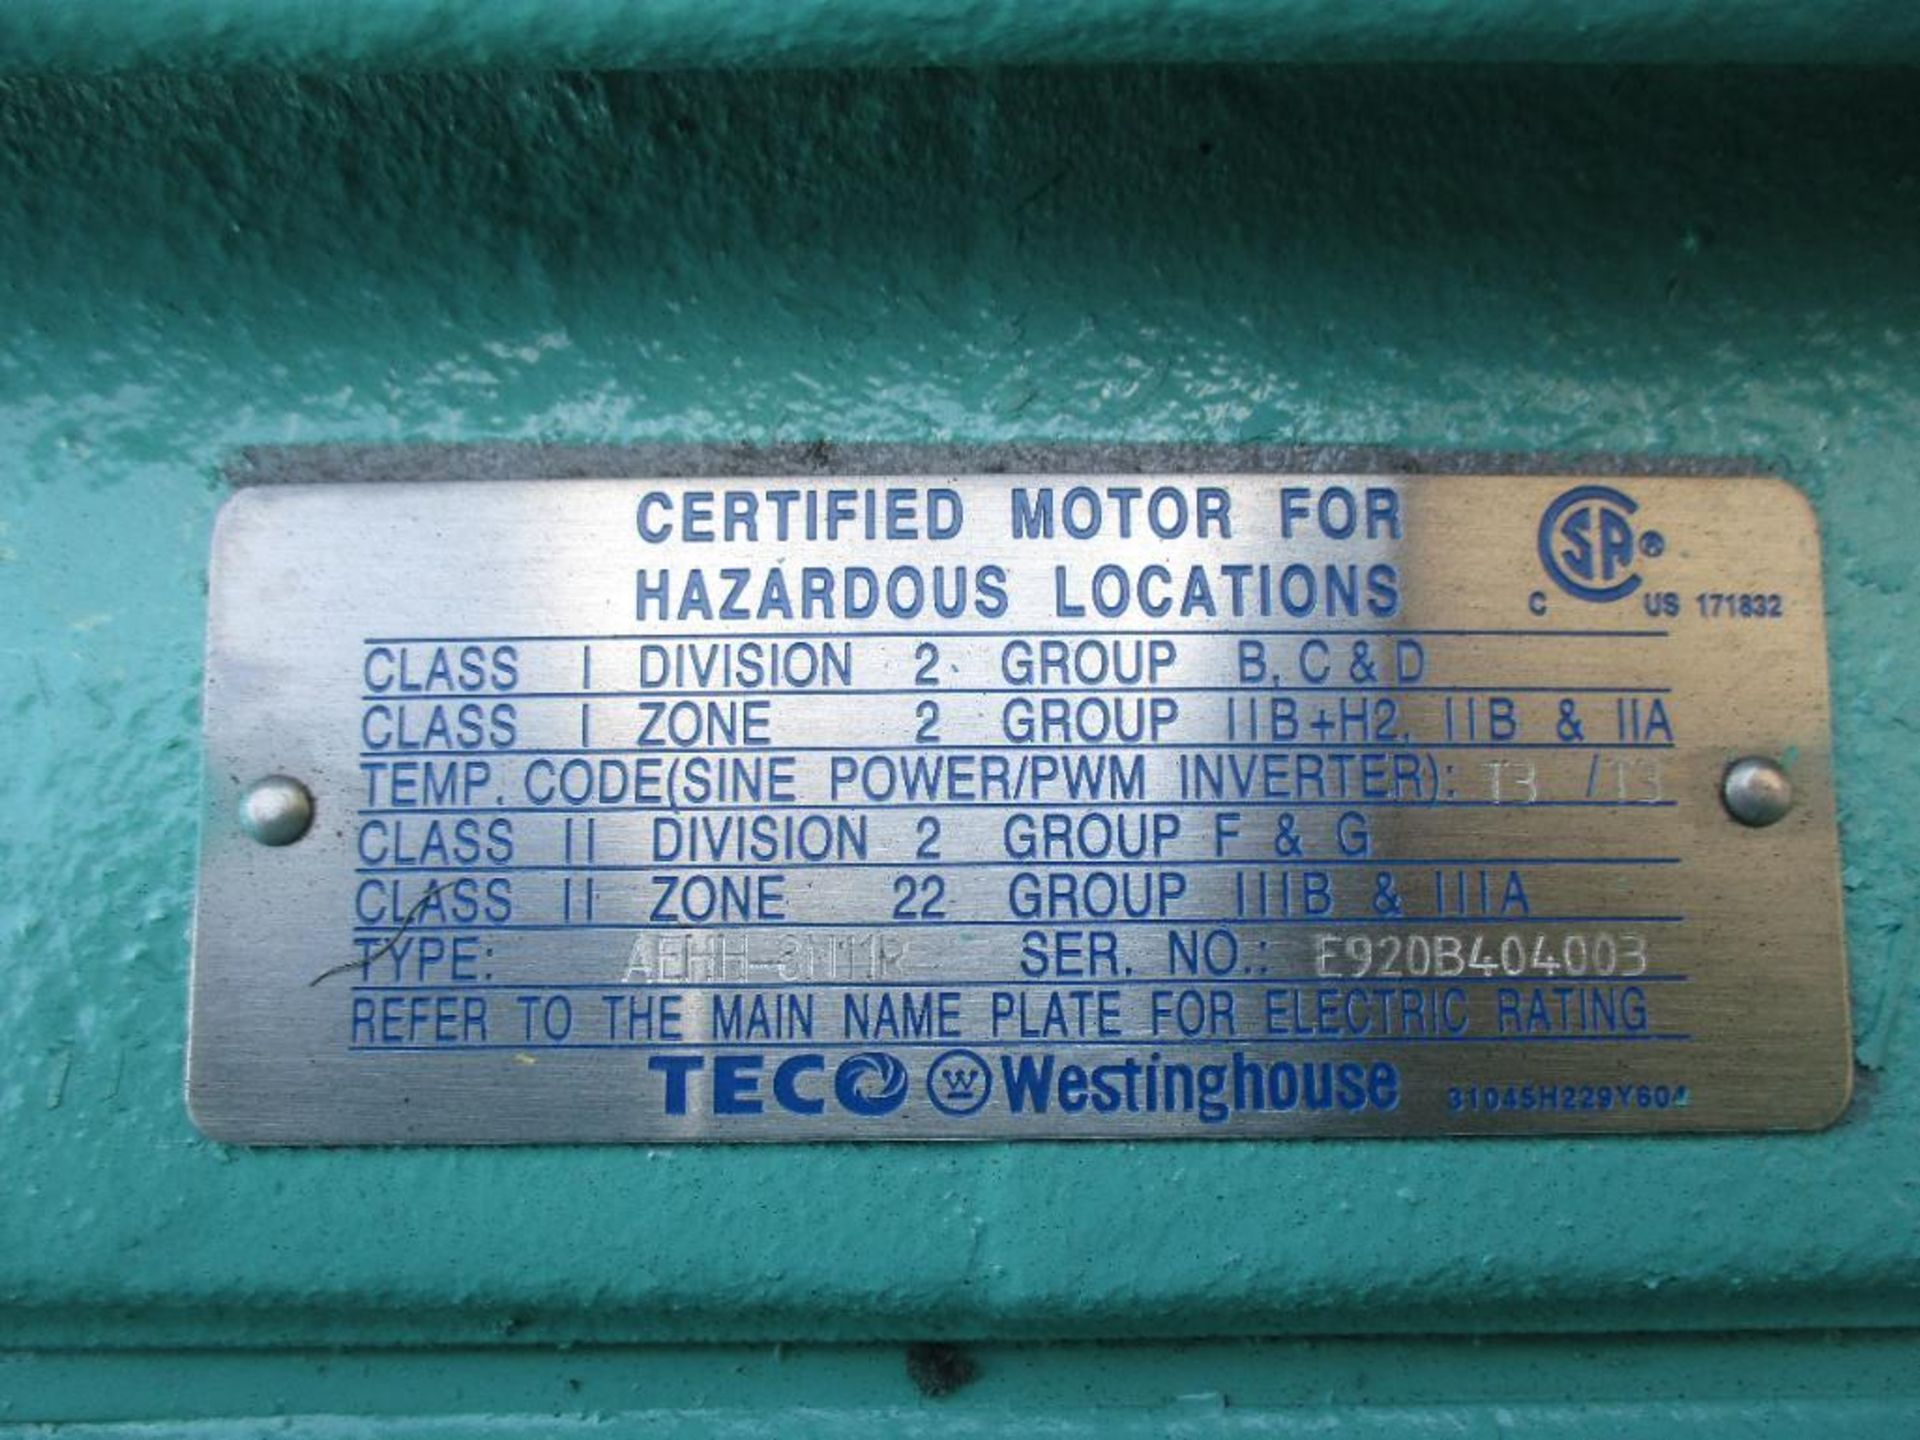 TECO WESTINGHOUSE MAX-E1 SEVER DUTY MOTOR EP2004R TYPE AEHH-8N11R 200HP 1785RPM 60HZ FRAME 447T 3 PH - Image 2 of 7